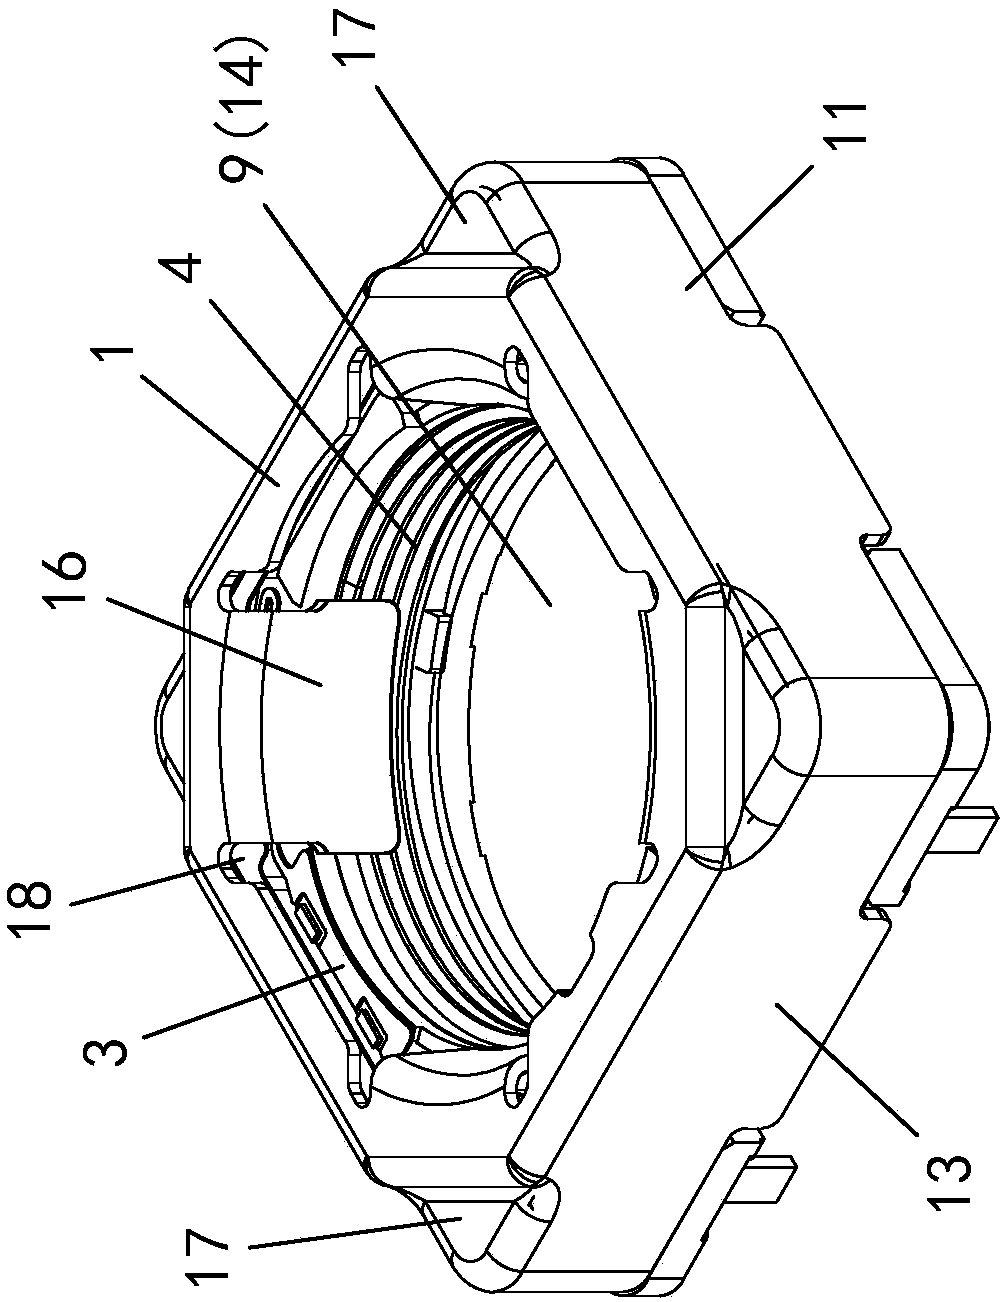 Voice coil motor with relatively high performance